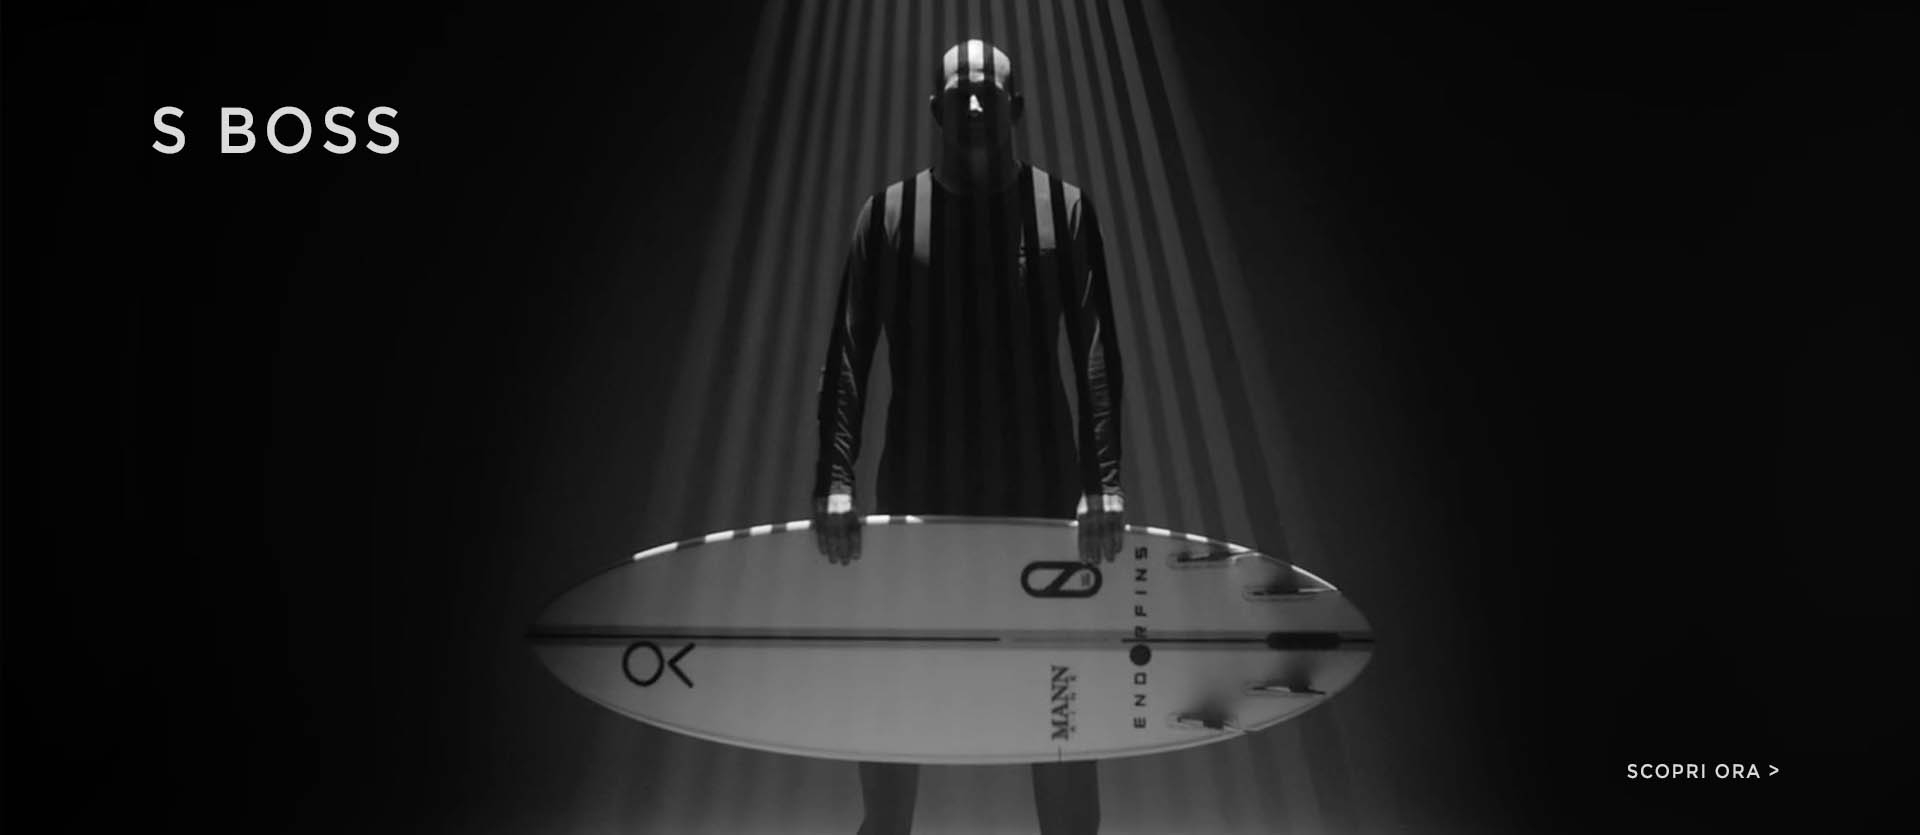 The S BOSS by Kelly Slater Designs